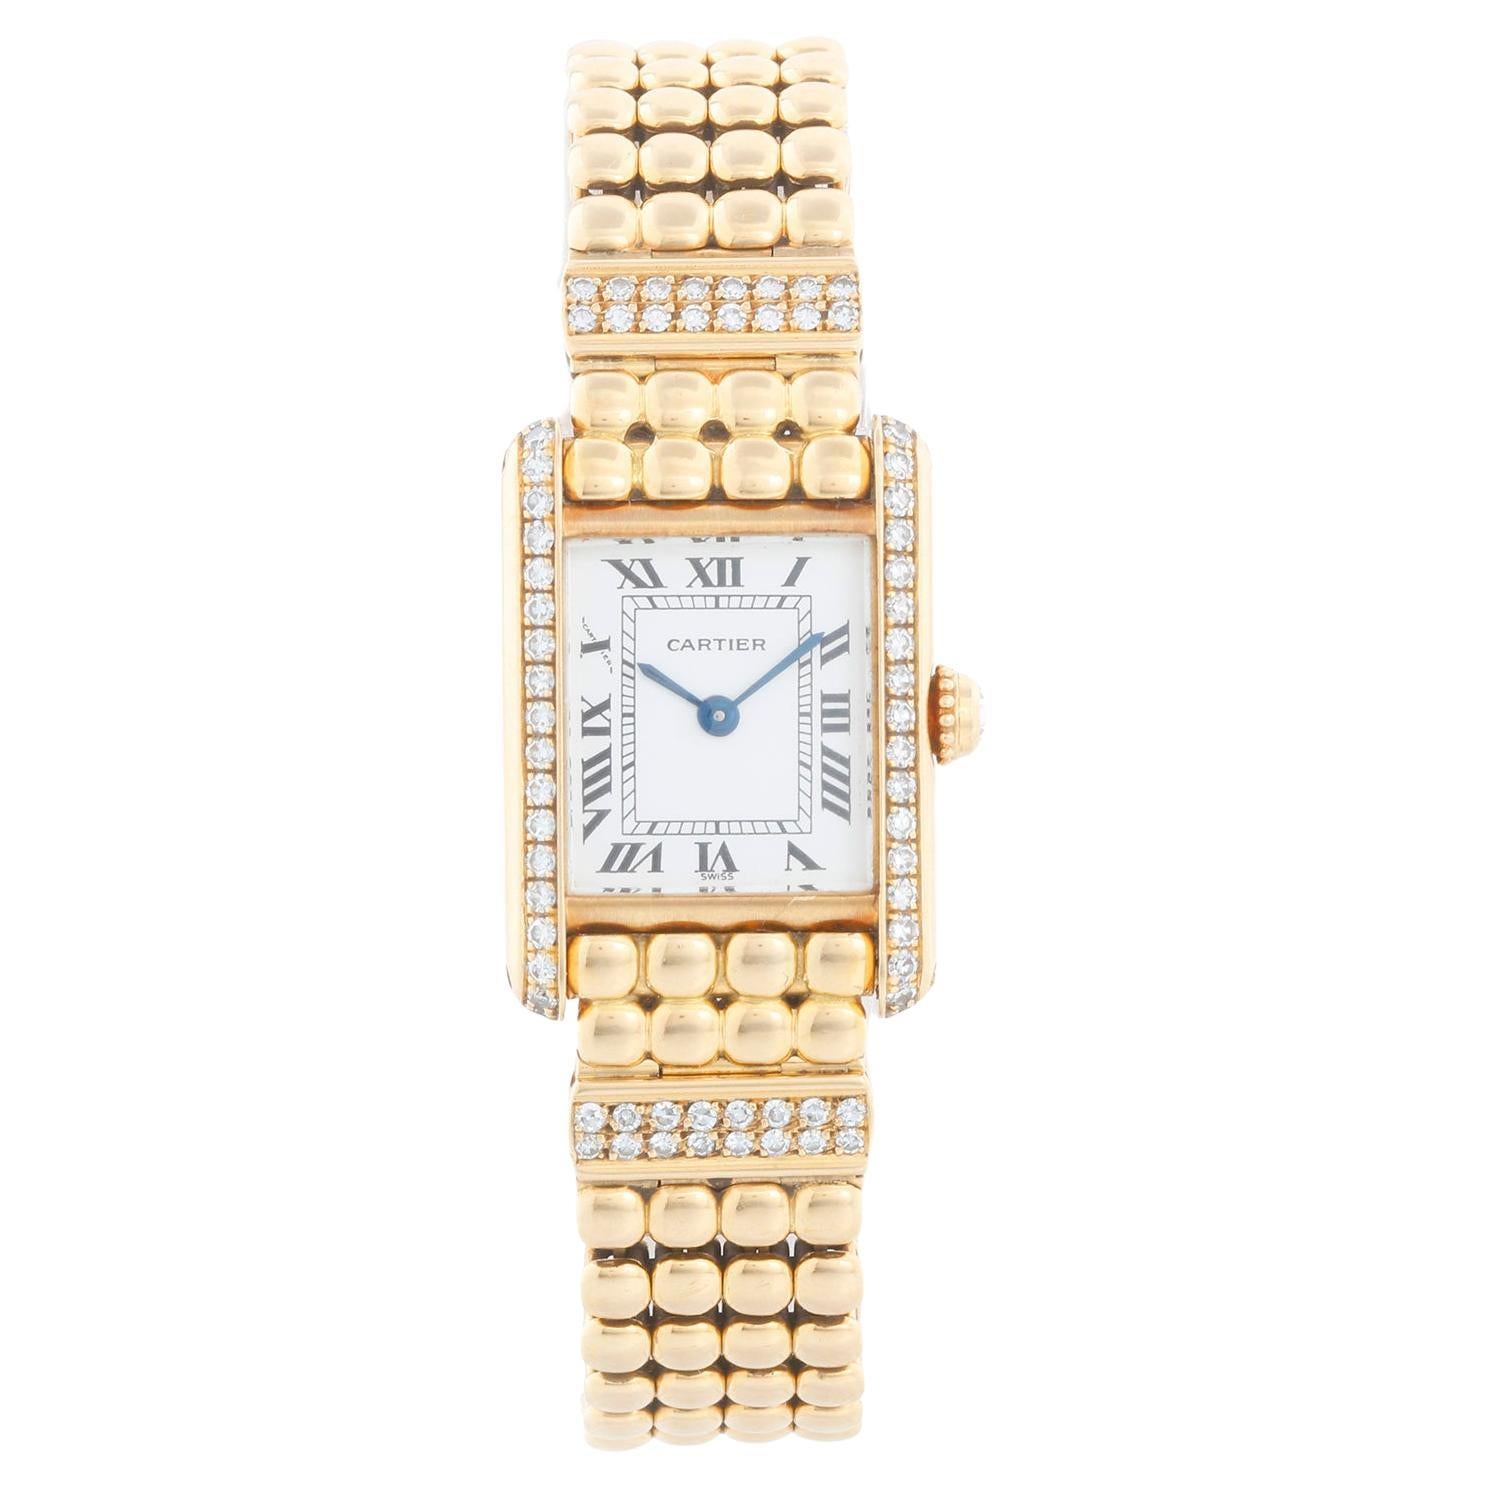 Rare & Unusual Cartier 18K Yellow Gold Tank Ladies Watch 8057 For Sale